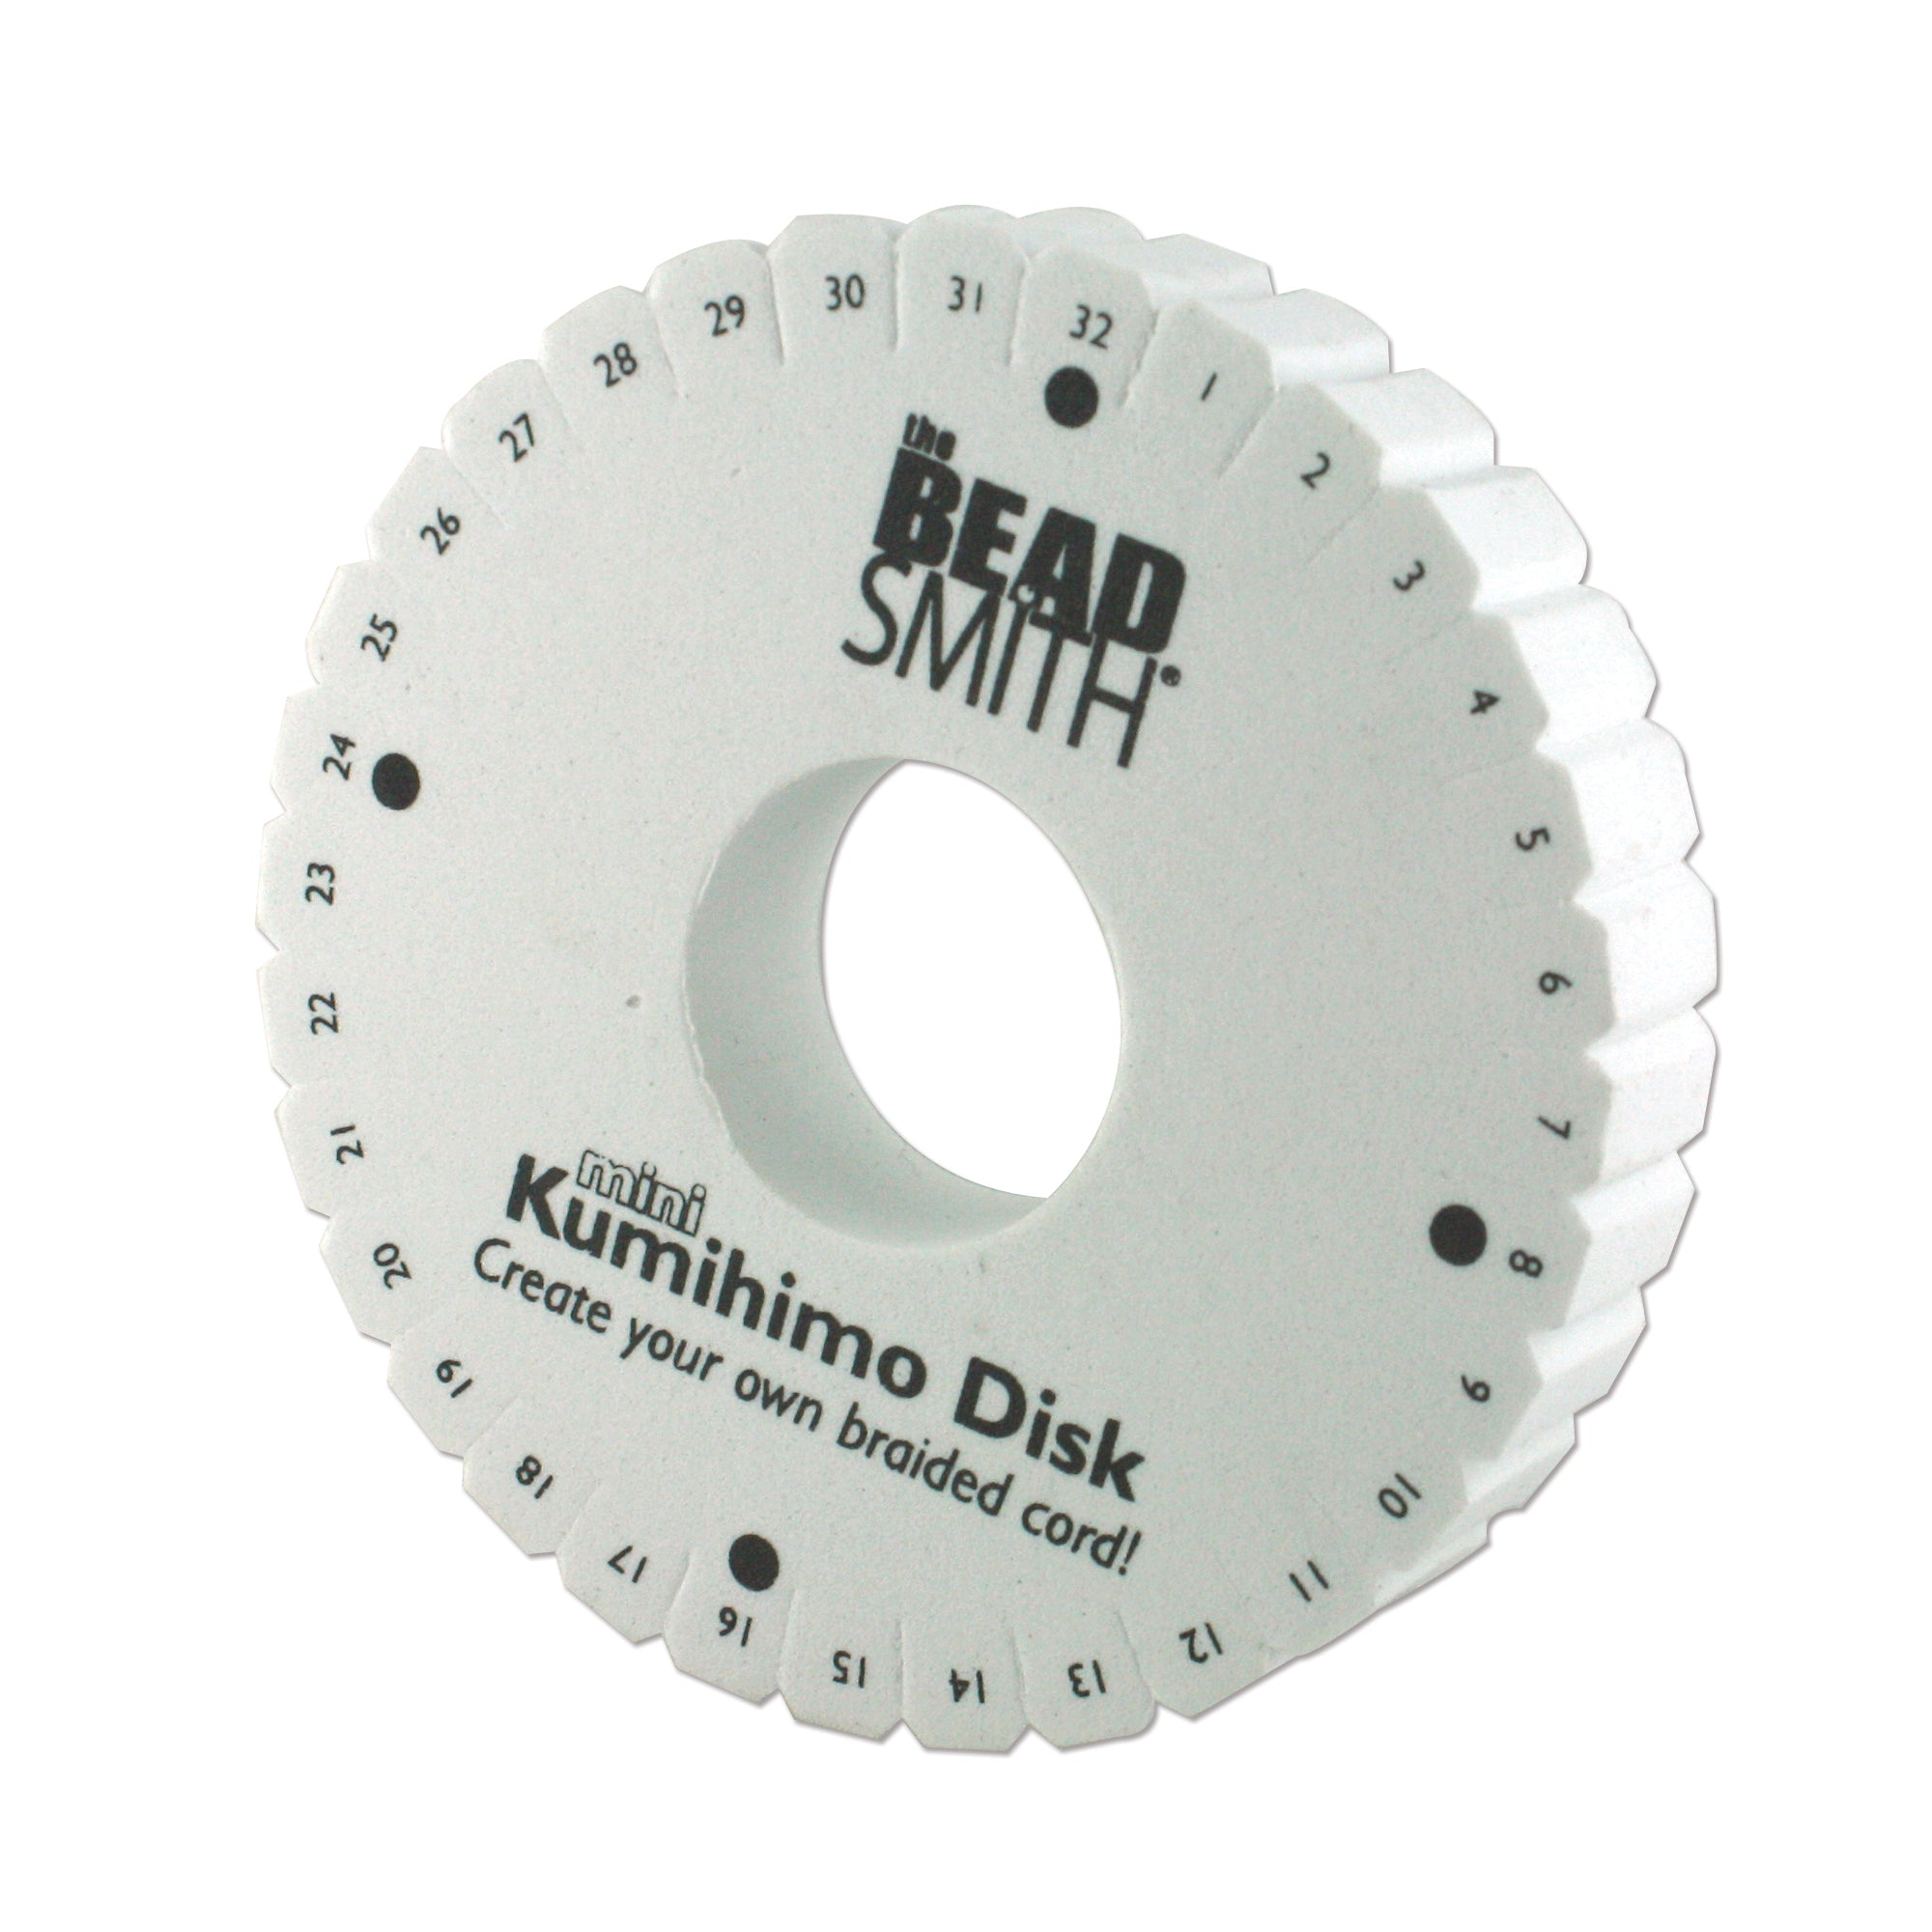 Kumihimo Disk, 4.25 Inches, Double Density, 20mm Thick, 35mm Hole, #60 -  Jewelry Tool Box